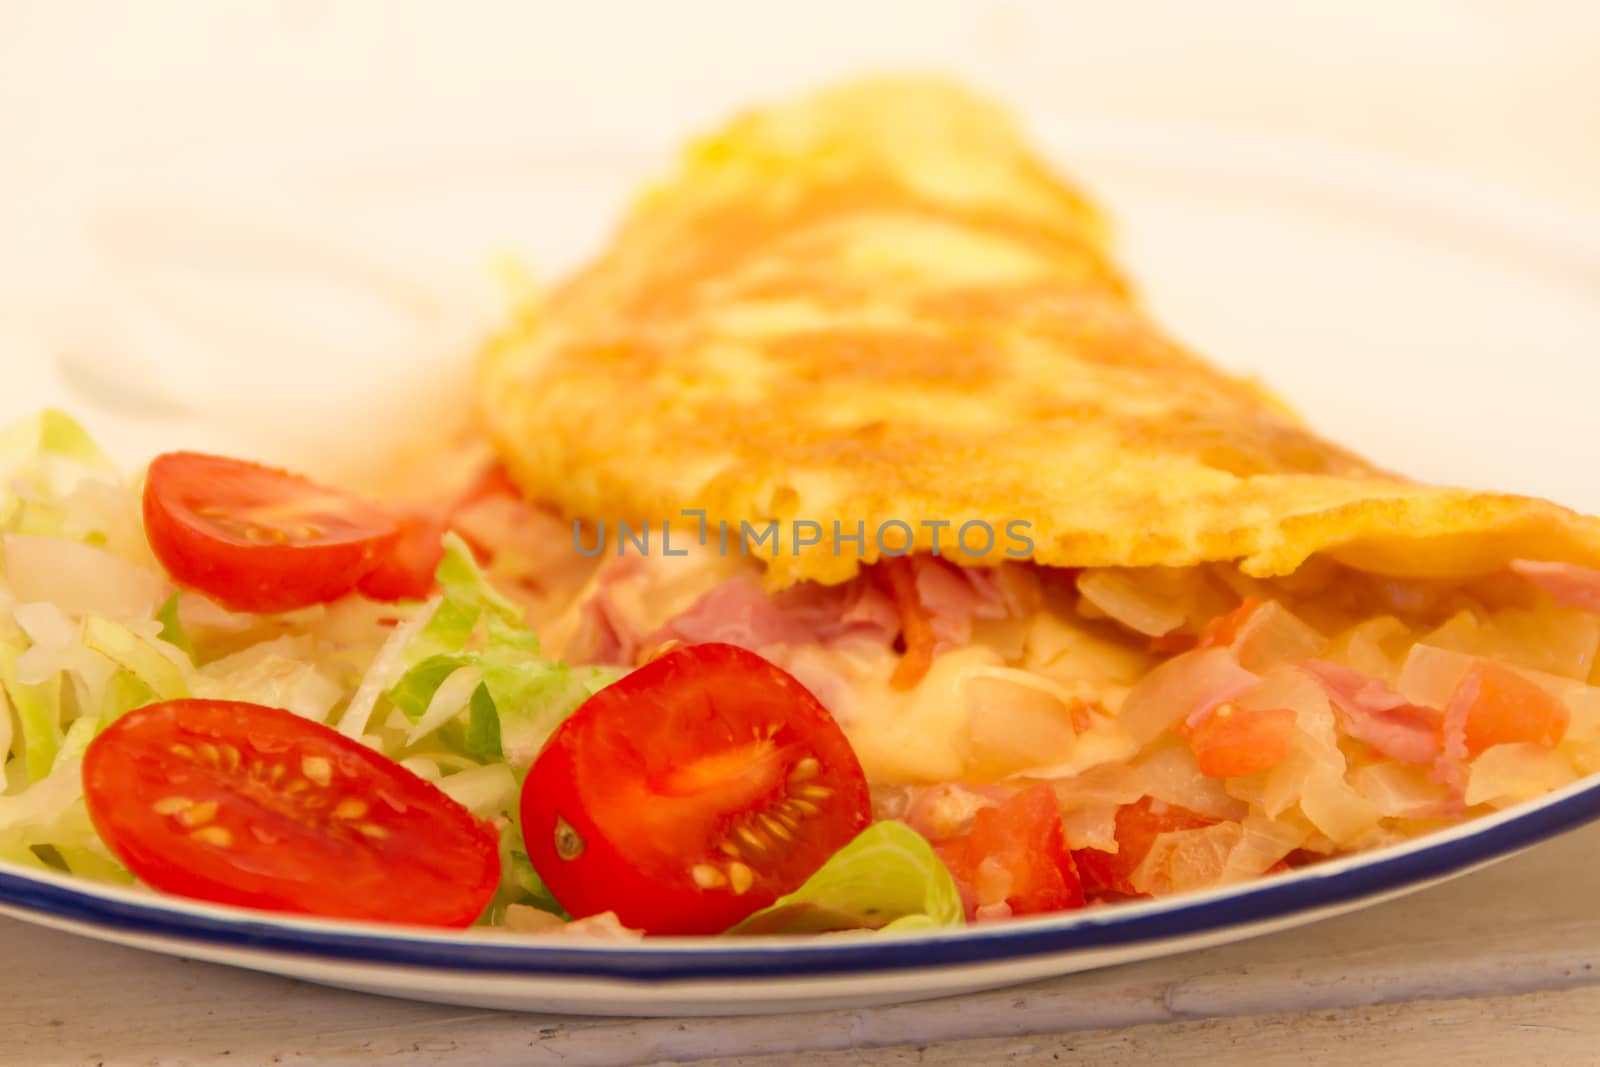 plate with omelette and salad of cherry tomatoes and lettuce